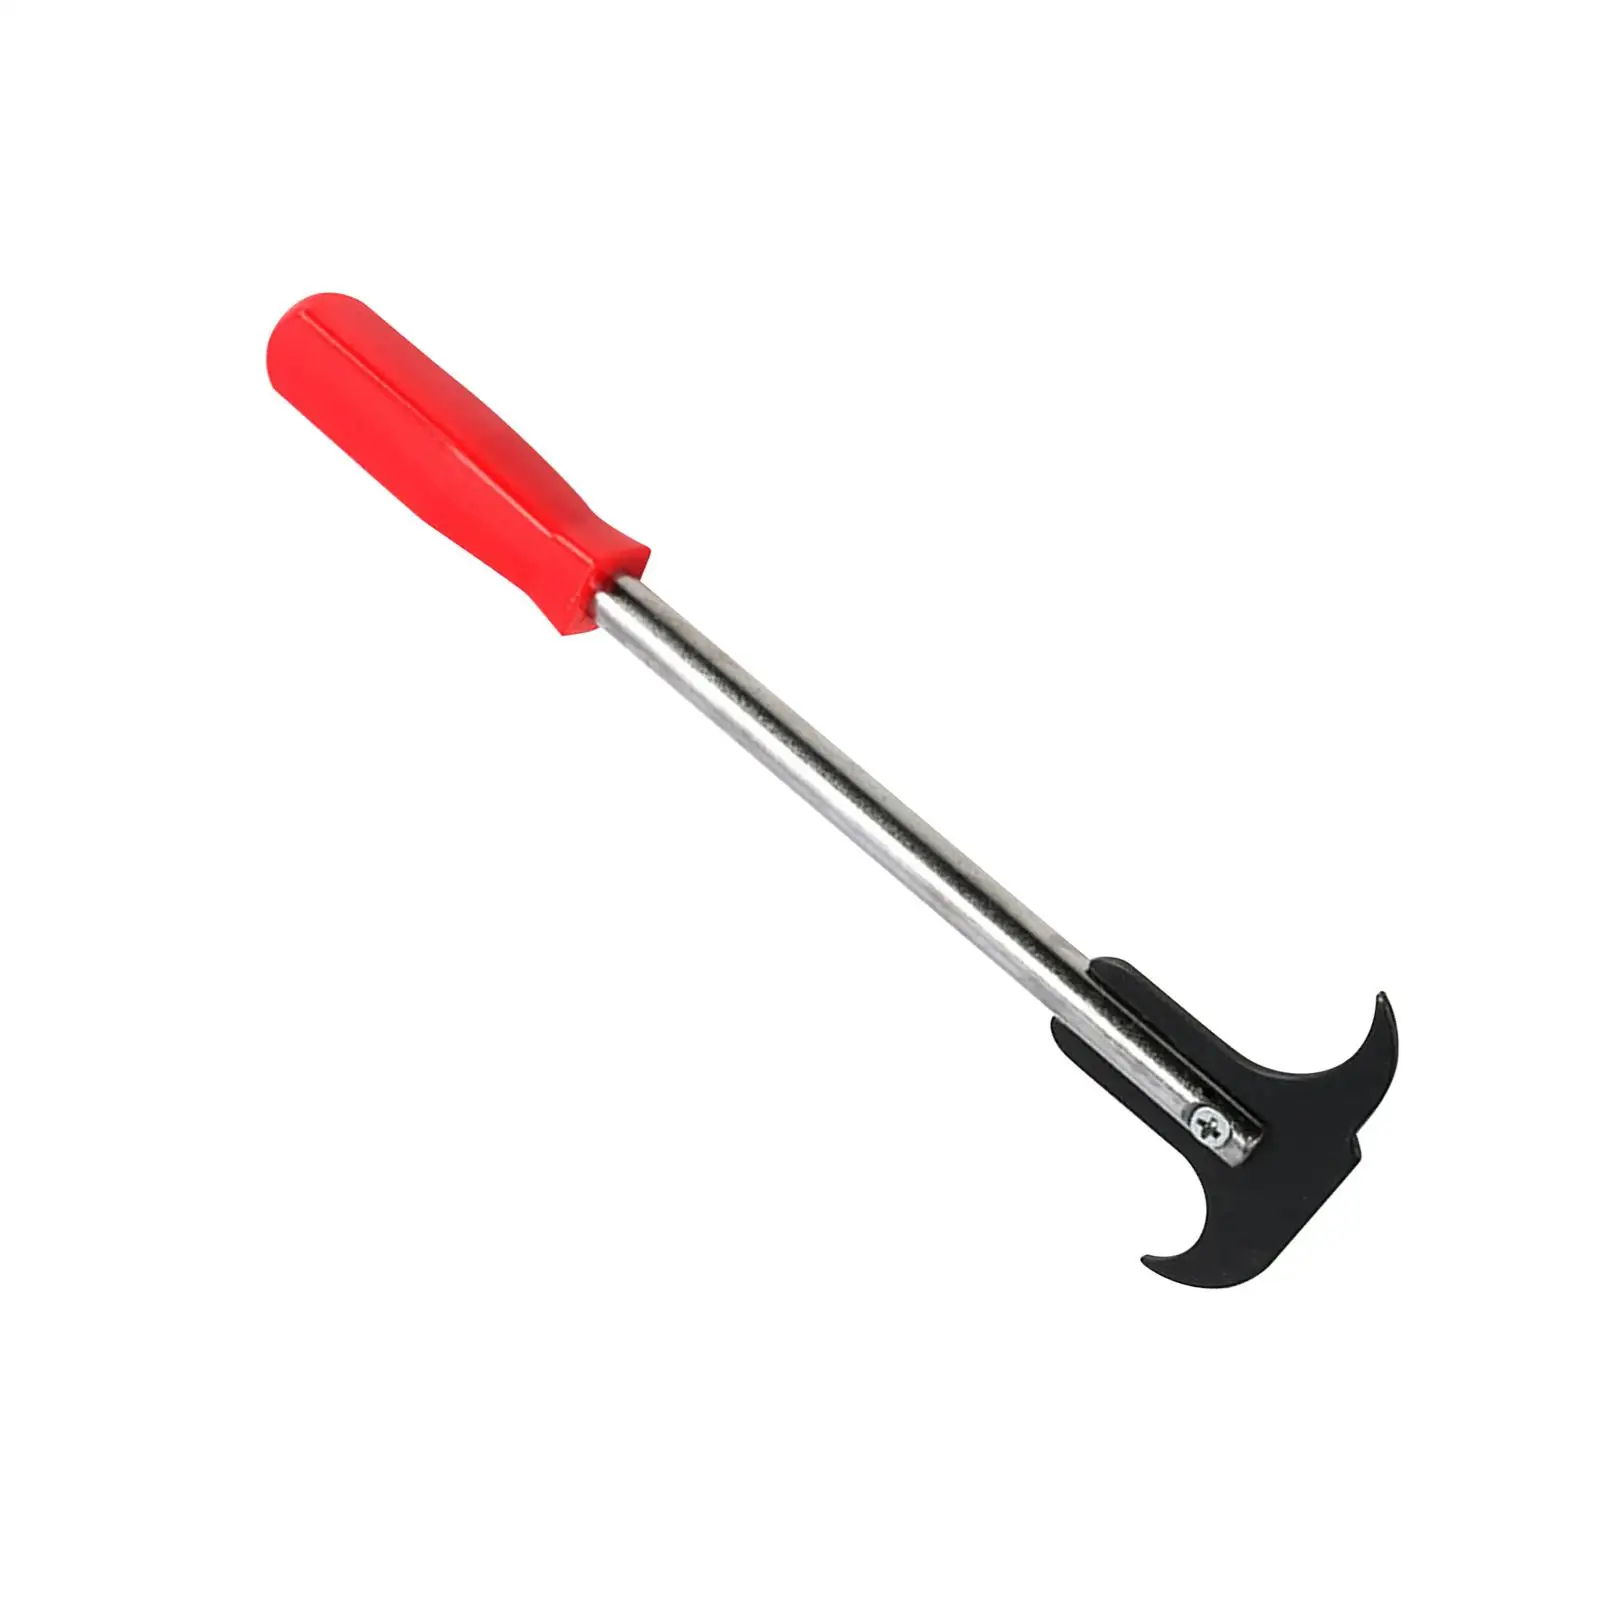 Seal Puller Car Repair Dual Hook Tips Assembly for Oil and Grease Seals Removal Portable Plastic Handle Oil Seal Puller Tool